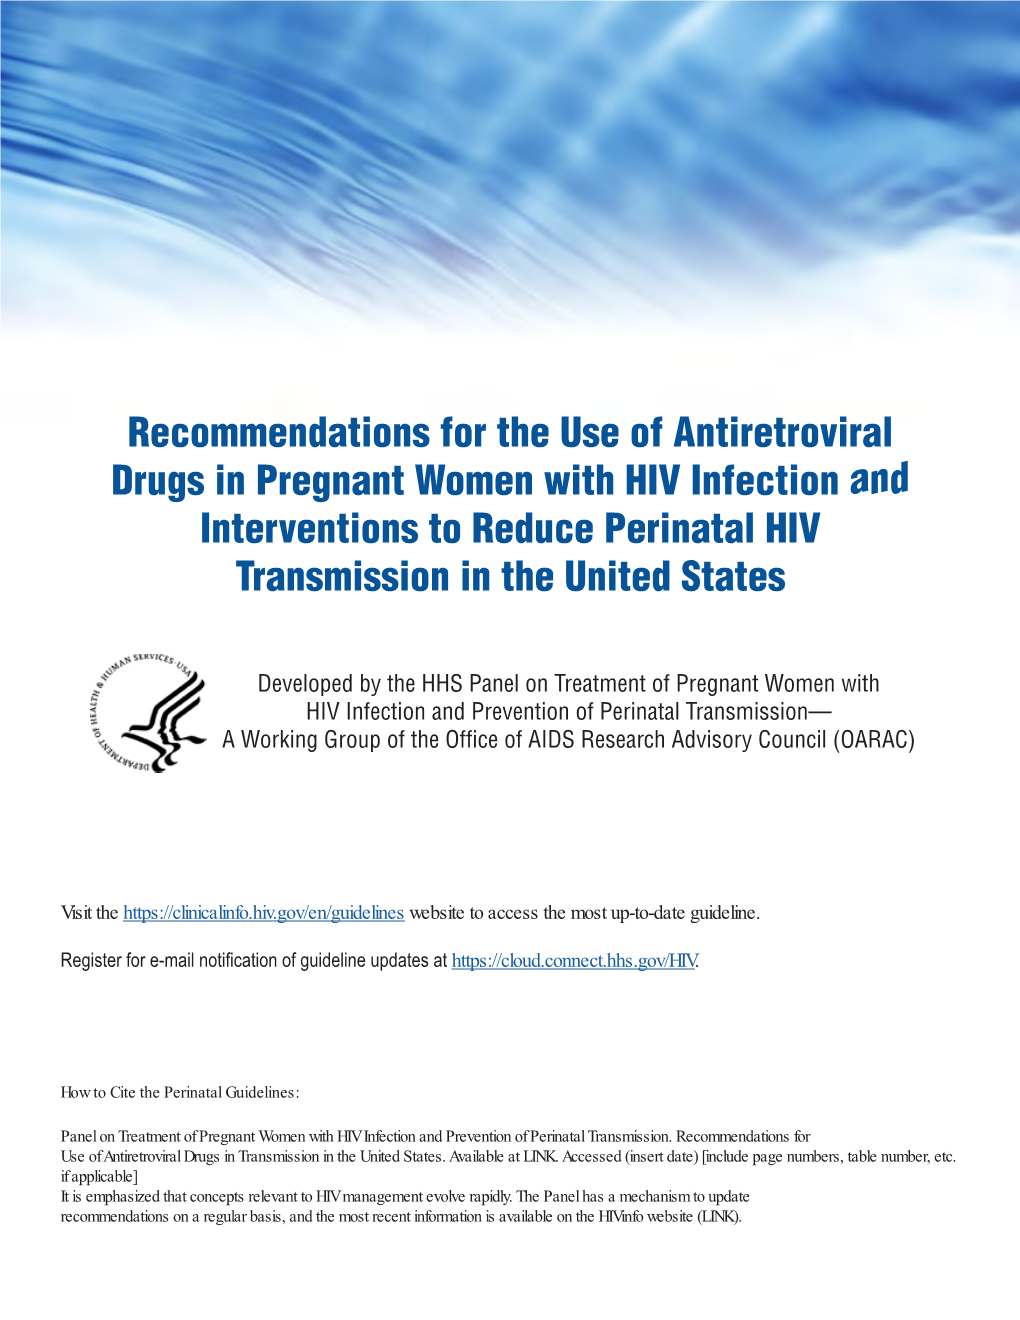 2020 Recommendations for the Use of Antiretroviral Drugs in Pregnant